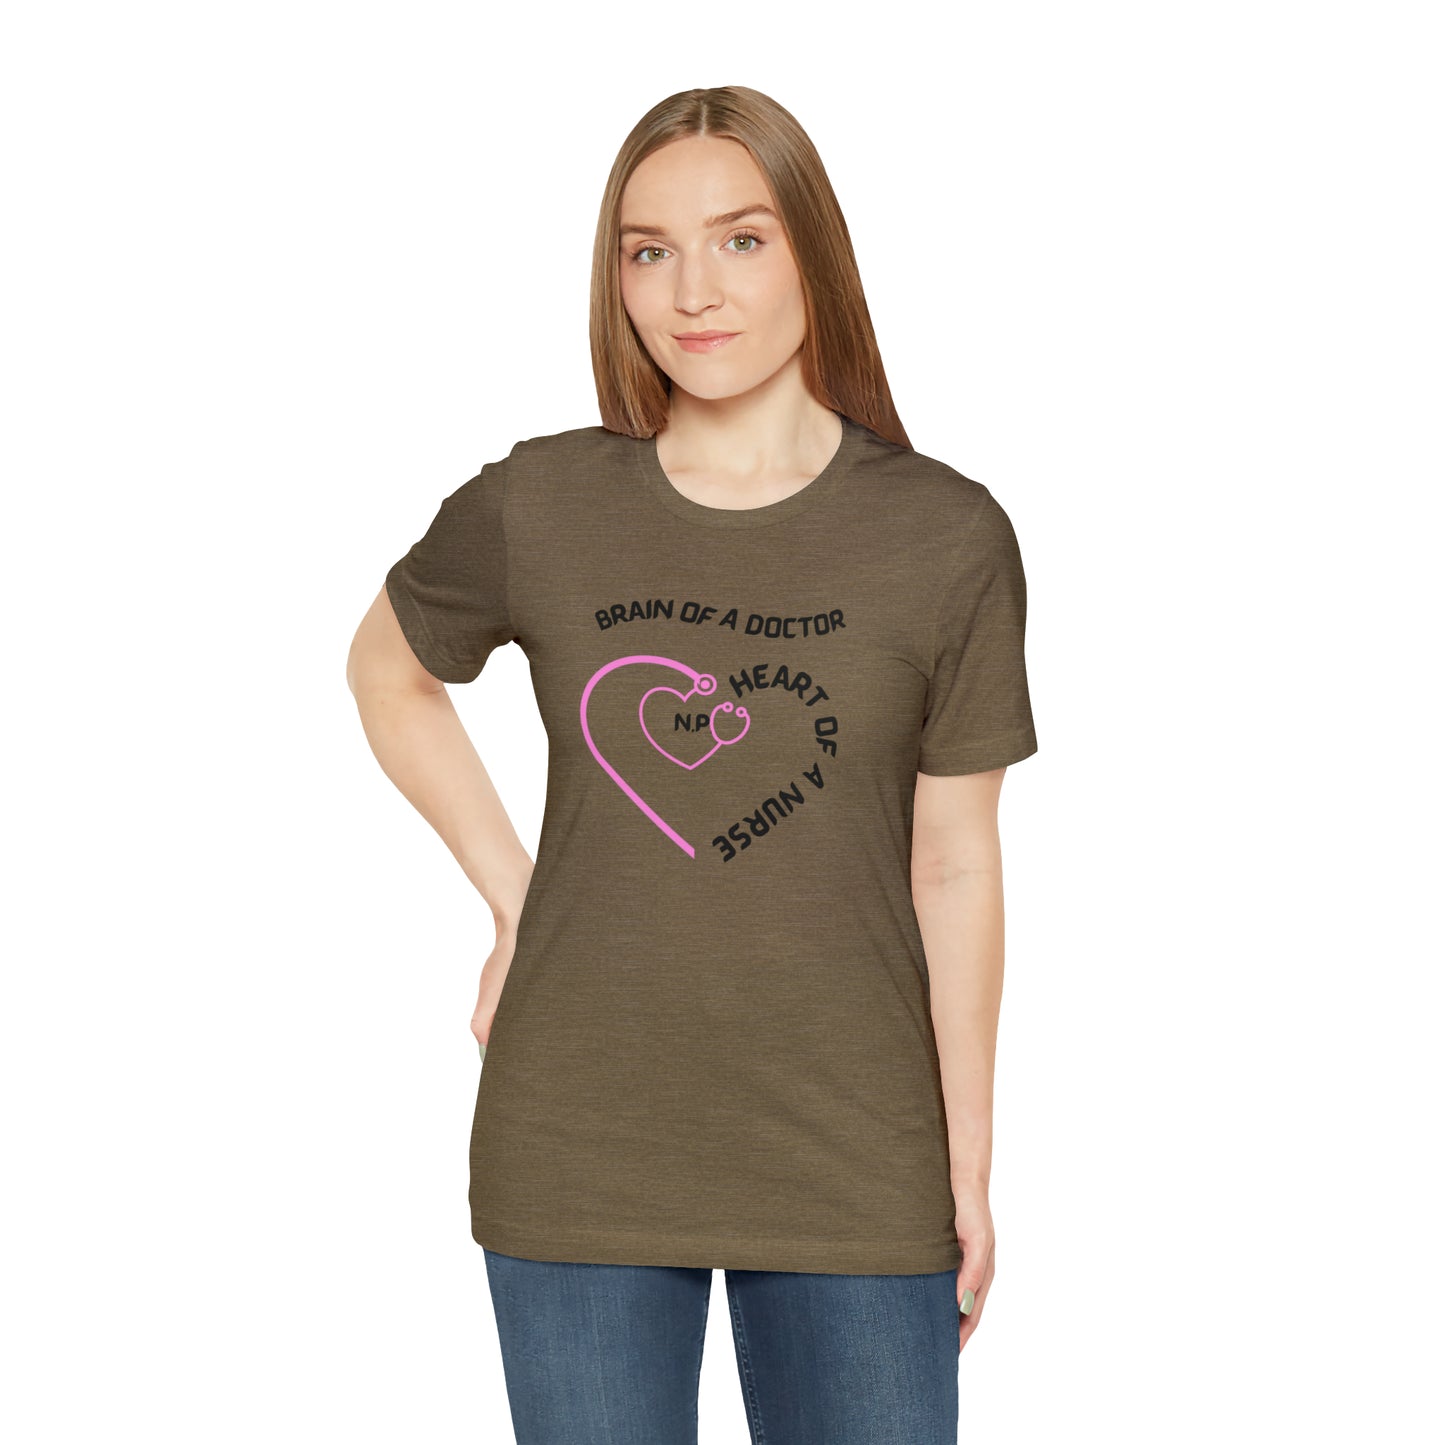 HEART OF A NURSE T SHIRT GIFT FOR NPS